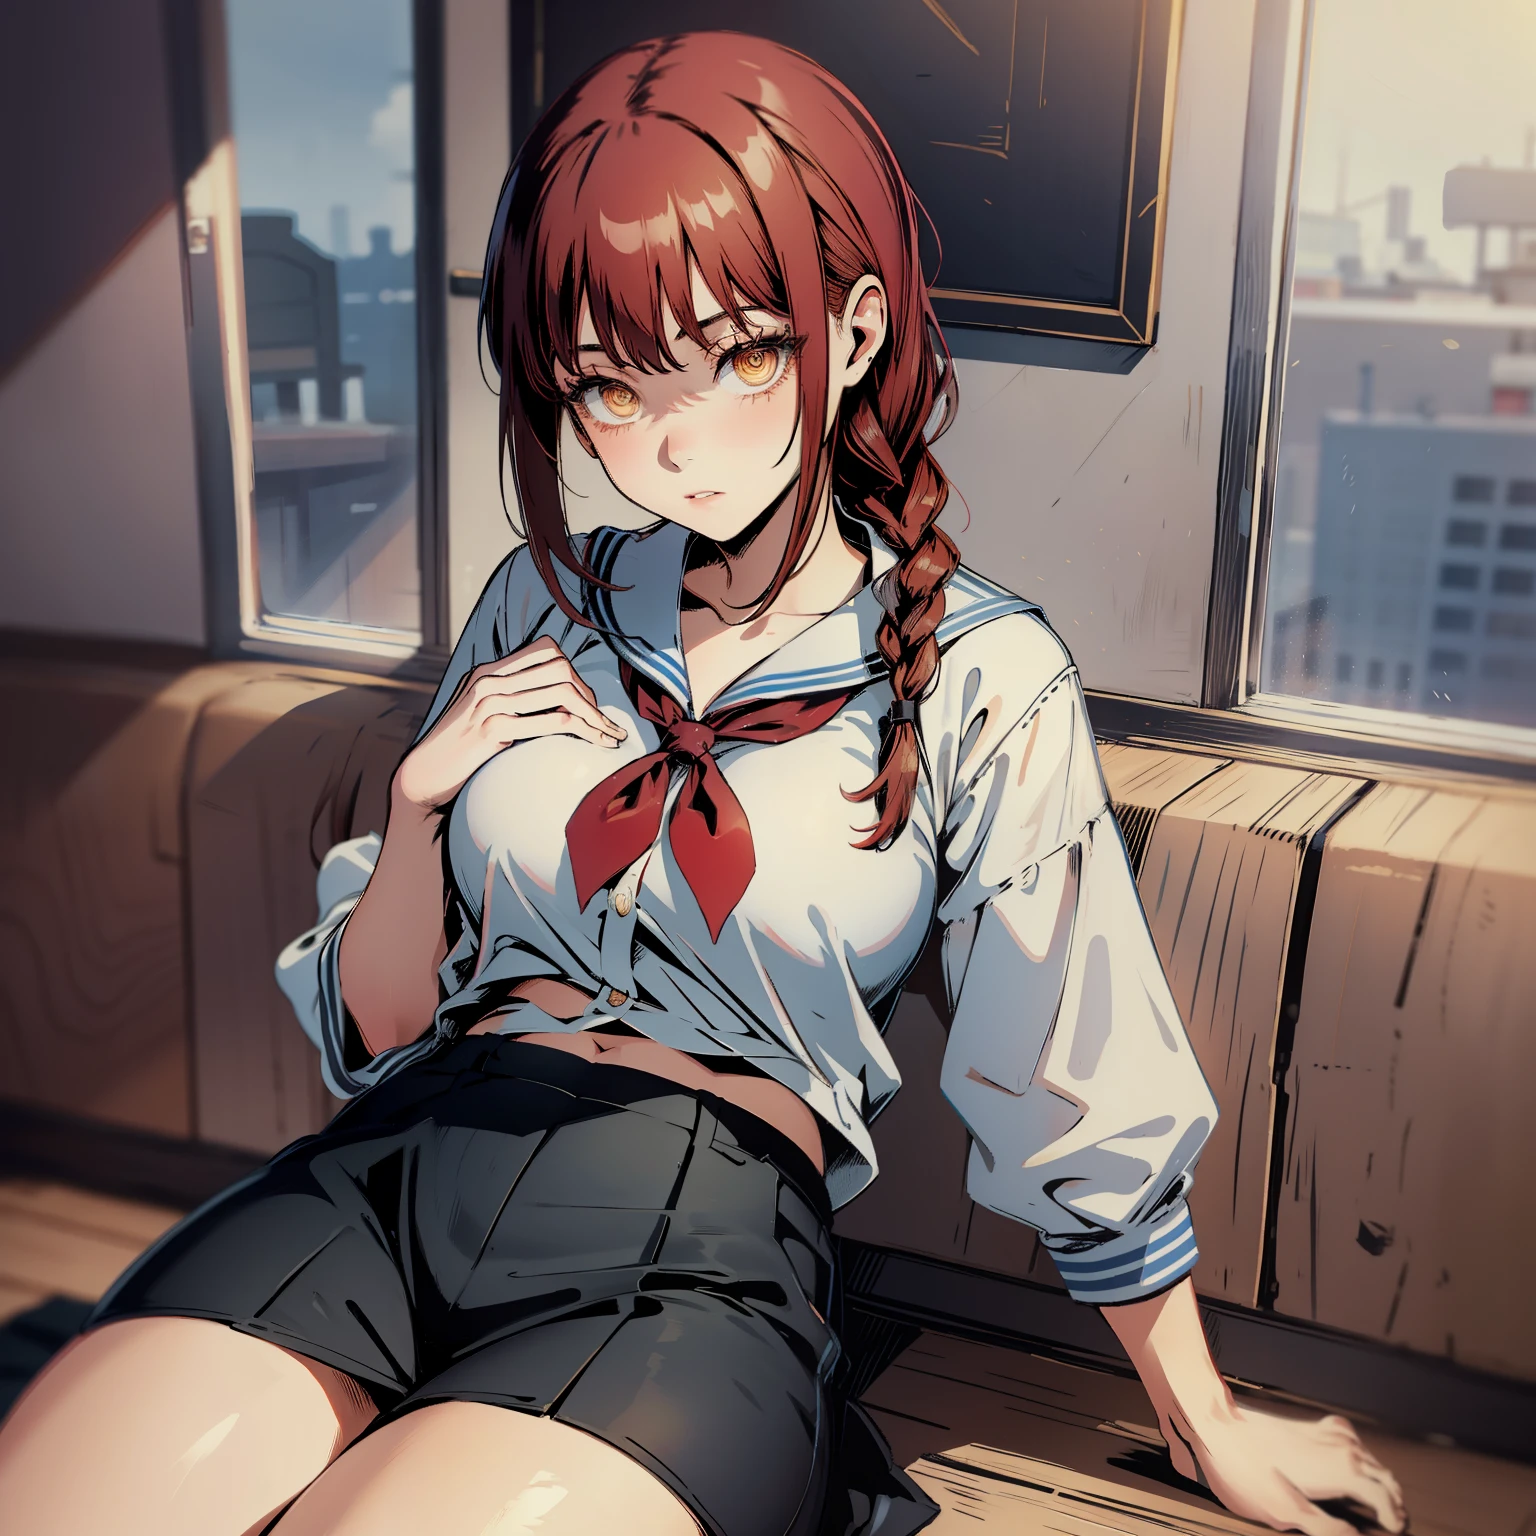 masterpiece, besy quality, cowboy shot, high school girl, sailor suit, skirt, droopy eyes, big, thick thighs, black pants, sexy girl, full of sensuality, makima
braided ponytail
ringed eyes, girl